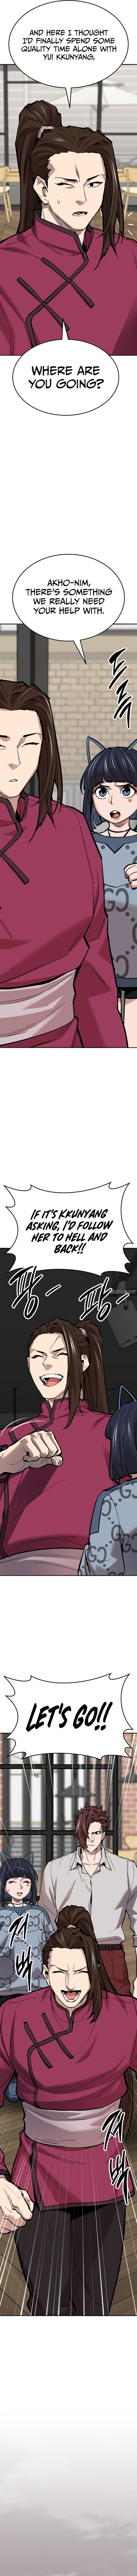 Limit Breaker - Chapter 134 Page 8